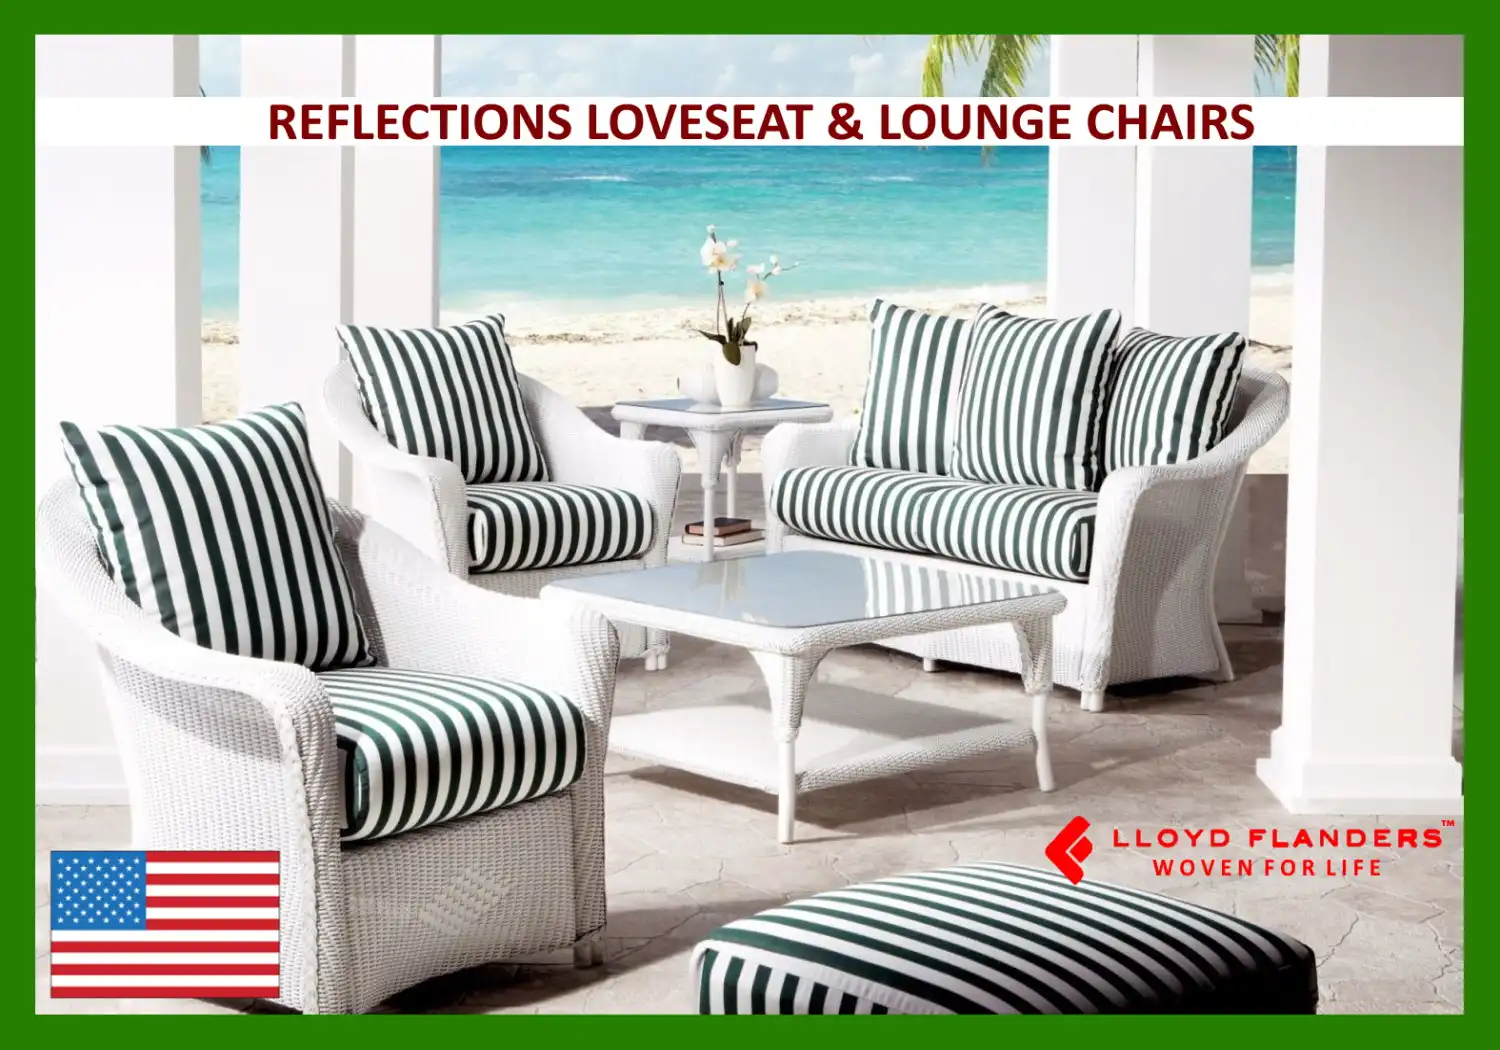 REFLECTIONS LOVESEAT & LOUNGE CHAIRS